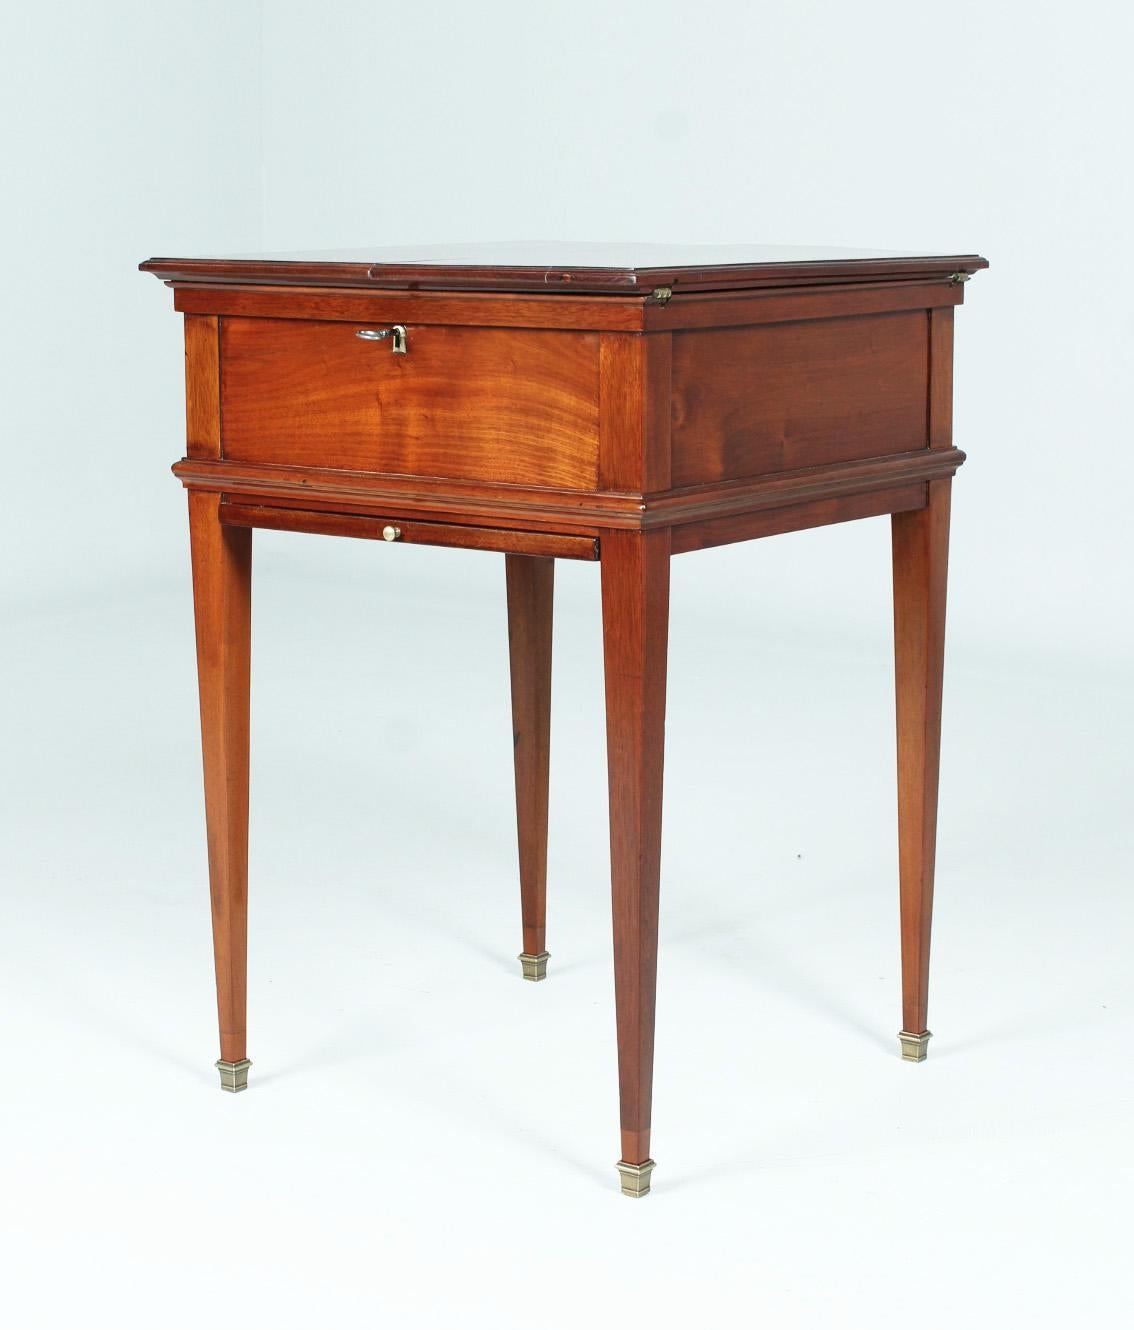 Convertible antique writing desk

France
Mahogany
Empire, 19th century

Dimensions: H x W x D: 84 x 52 x 56 cm.

Description:
Quite exceptional and extremely rare solid mahogany writing desk with sophisticated mechanism.

On four tapered